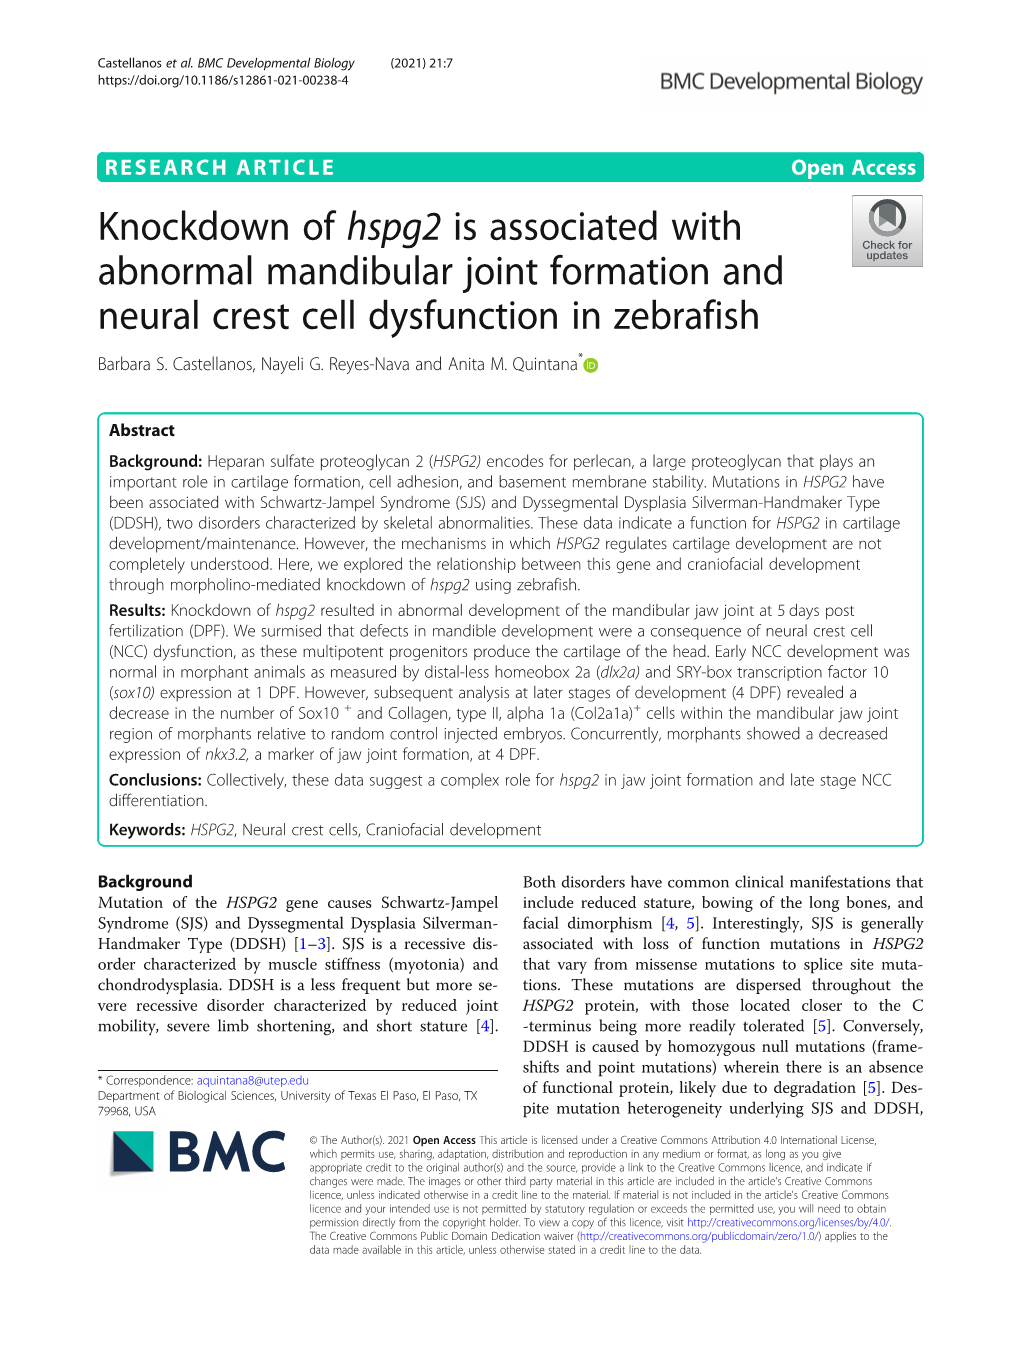 Knockdown of Hspg2 Is Associated with Abnormal Mandibular Joint Formation and Neural Crest Cell Dysfunction in Zebrafish Barbara S